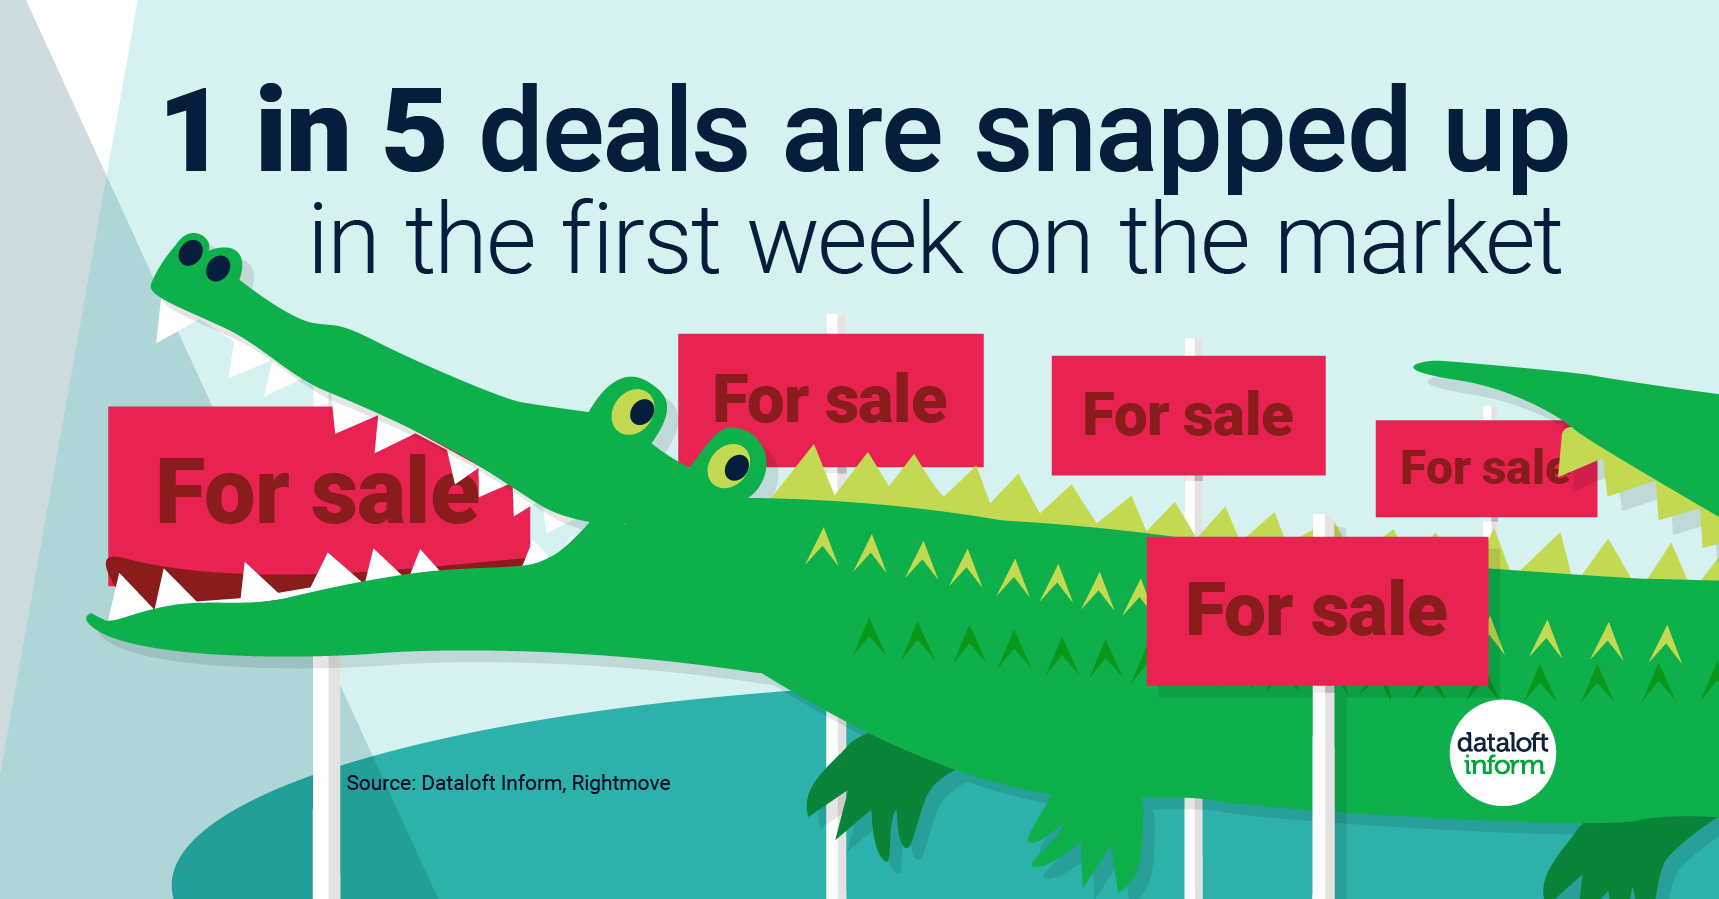 22% of deals agreed within a week